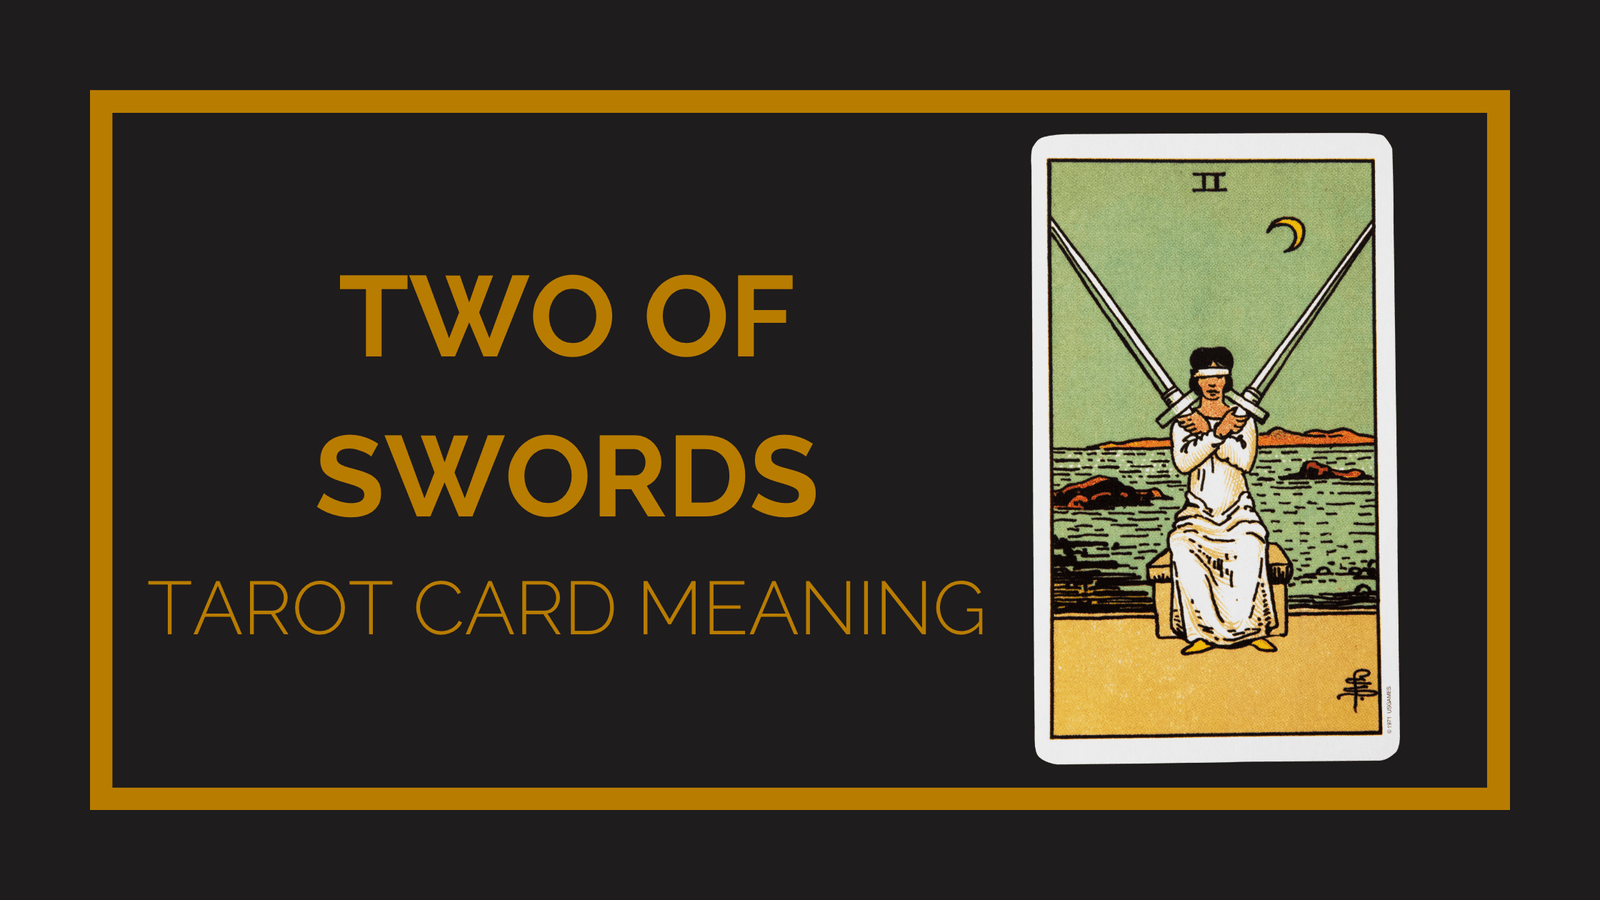 Two of swords tarot card meaning | tarot with gord